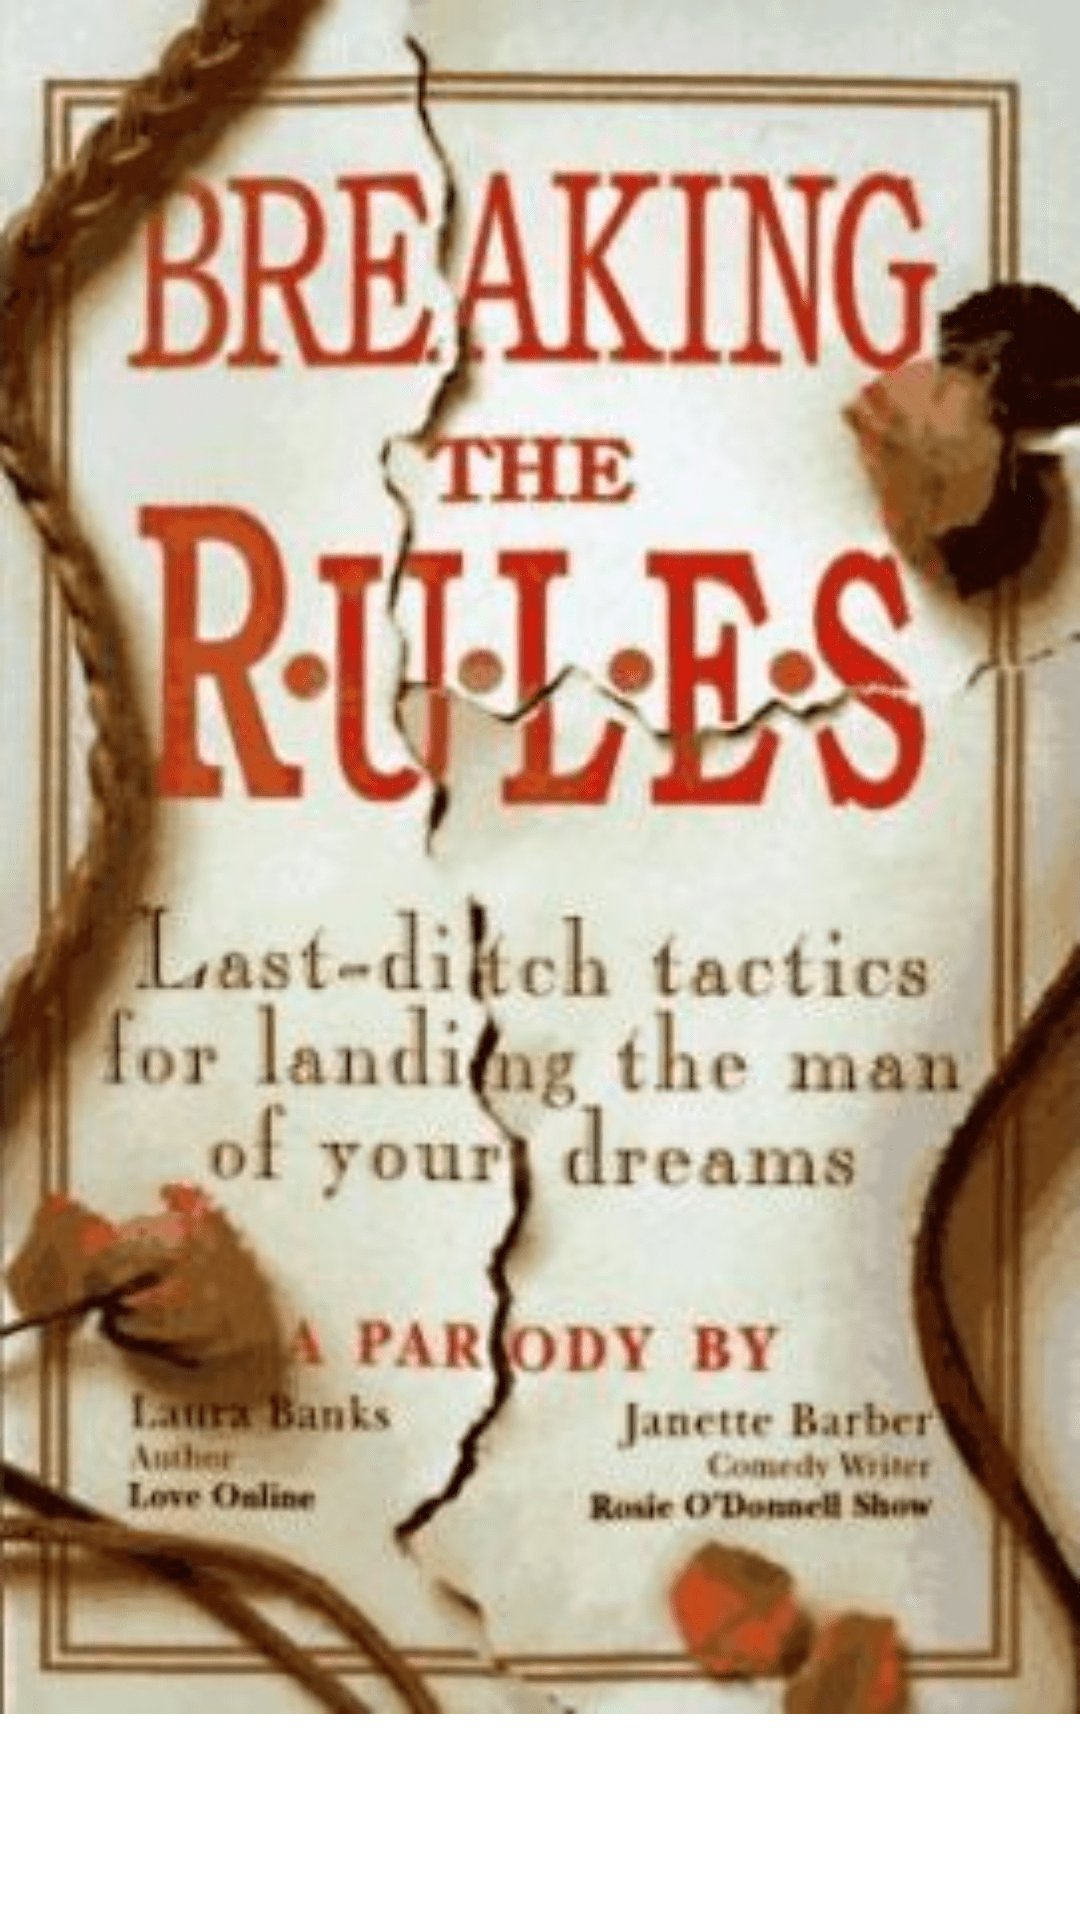 Breaking the Rules: Last-ditch Tactics for Landing the Man of Your Dreams